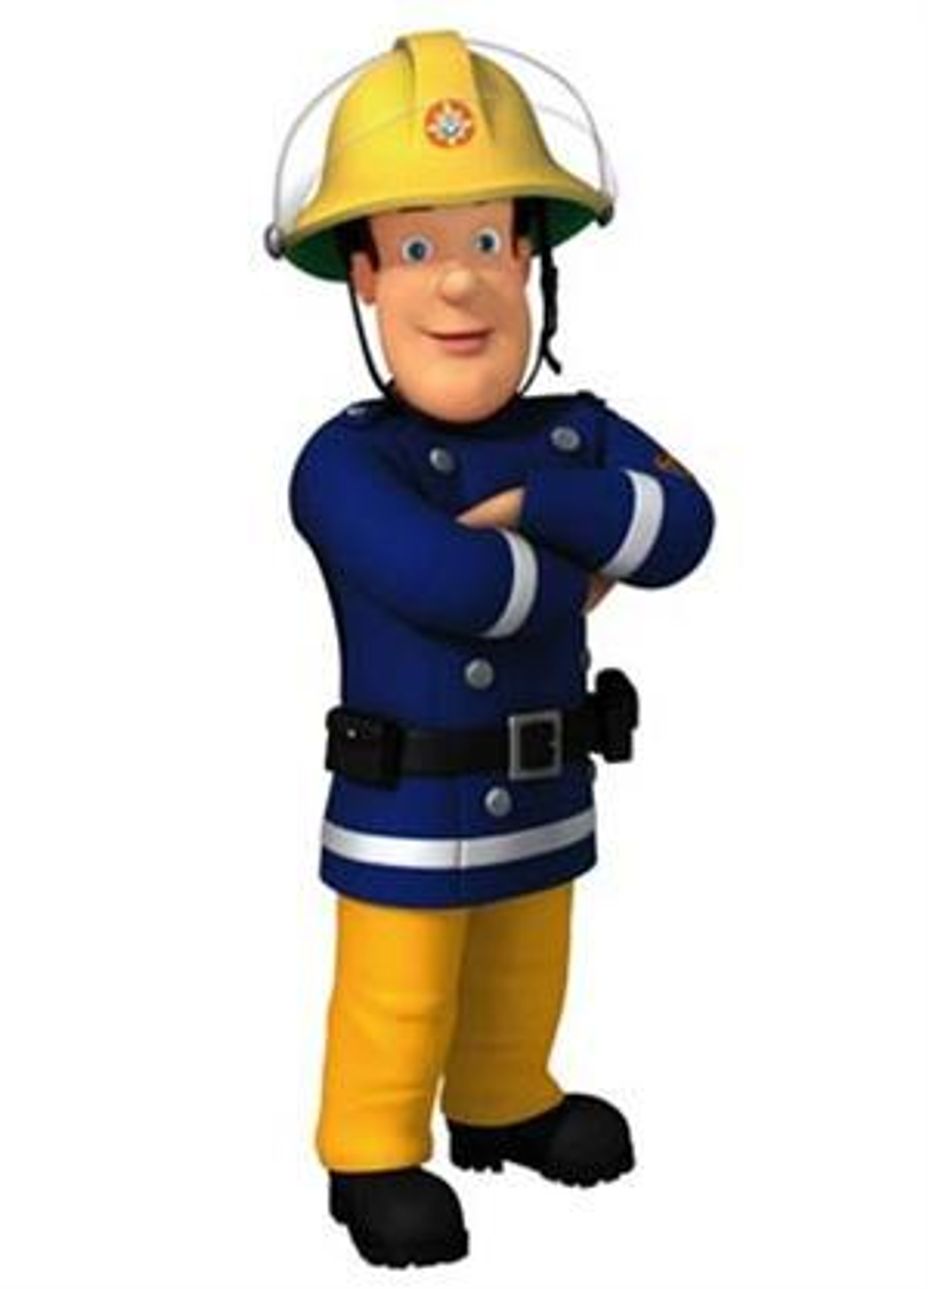 <p>I forgot fireman friday <a class="tm-topic-link ugc-topic" title="Giggles" href="/topic/giggles/" data-id="5cc062d34e72de00d9d35afd" data-name="Giggles" aria-label="hashtag Giggles">#Giggles</a>  <a class="tm-topic-link ugc-topic" title="laughterisgoodmedicine" href="/topic/laughterisgoodmedicine/" data-id="5e51a82791846900e03b862f" data-name="laughterisgoodmedicine" aria-label="hashtag laughterisgoodmedicine">#laughterisgoodmedicine</a> </p>